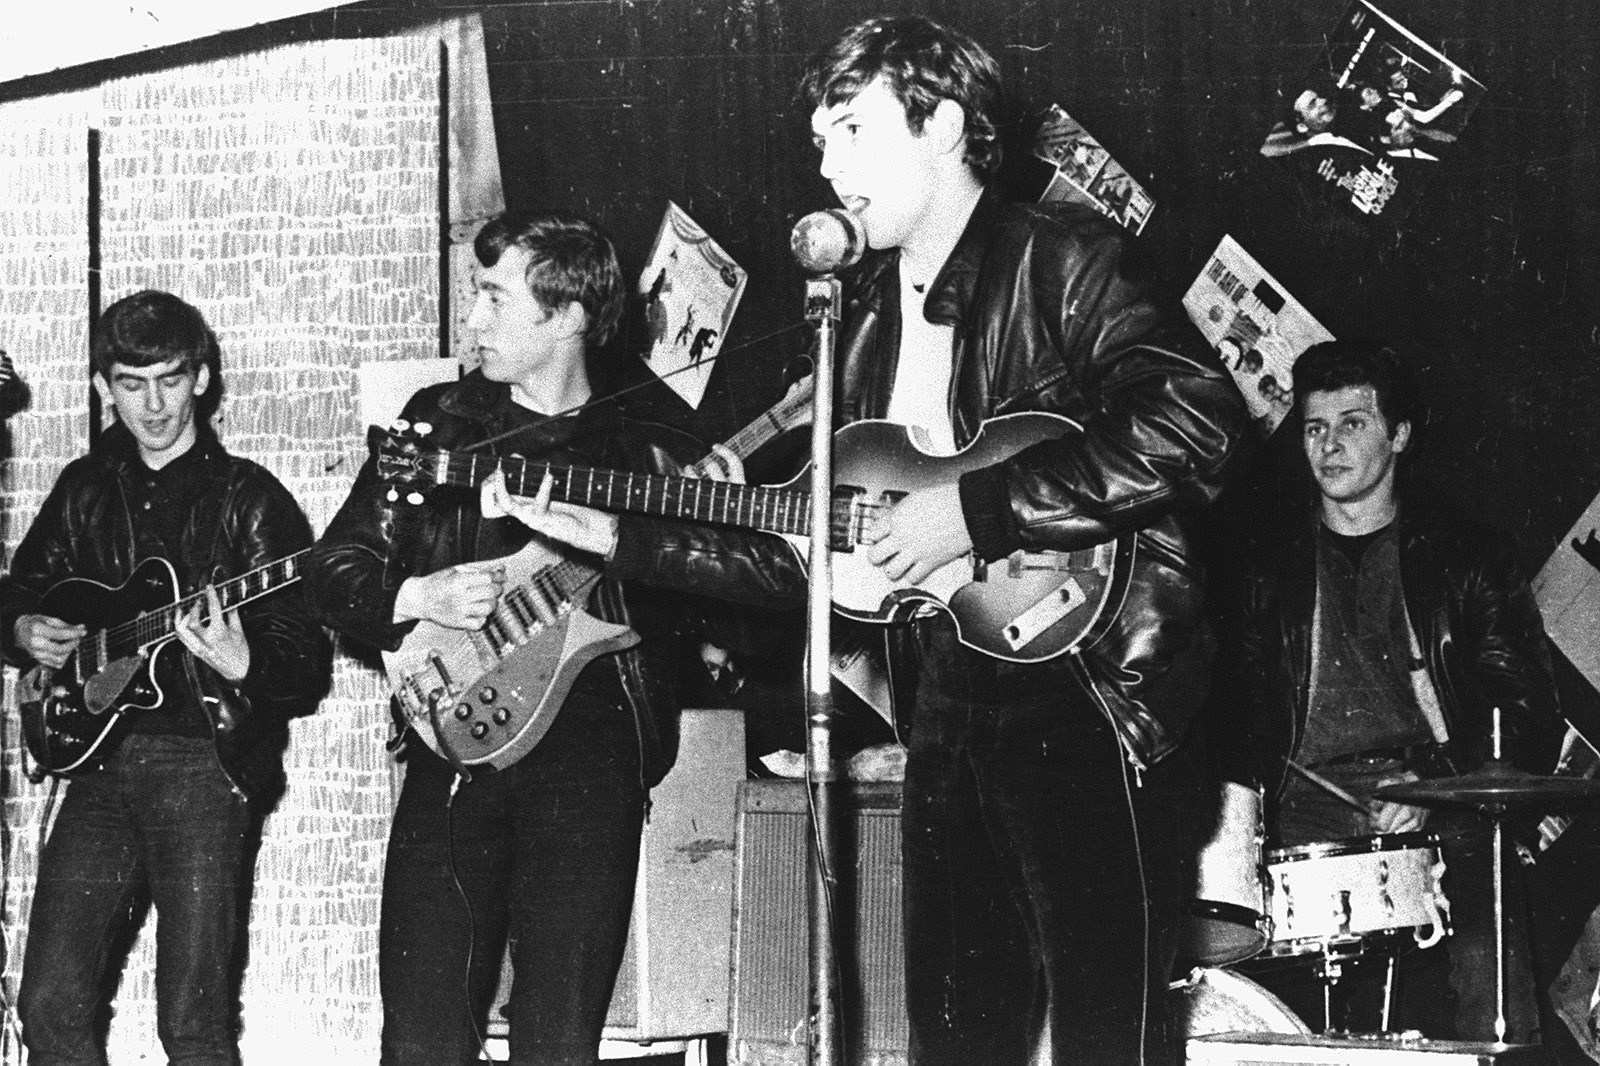 All Or Nothing': When The Small Faces Toppled The Beatles